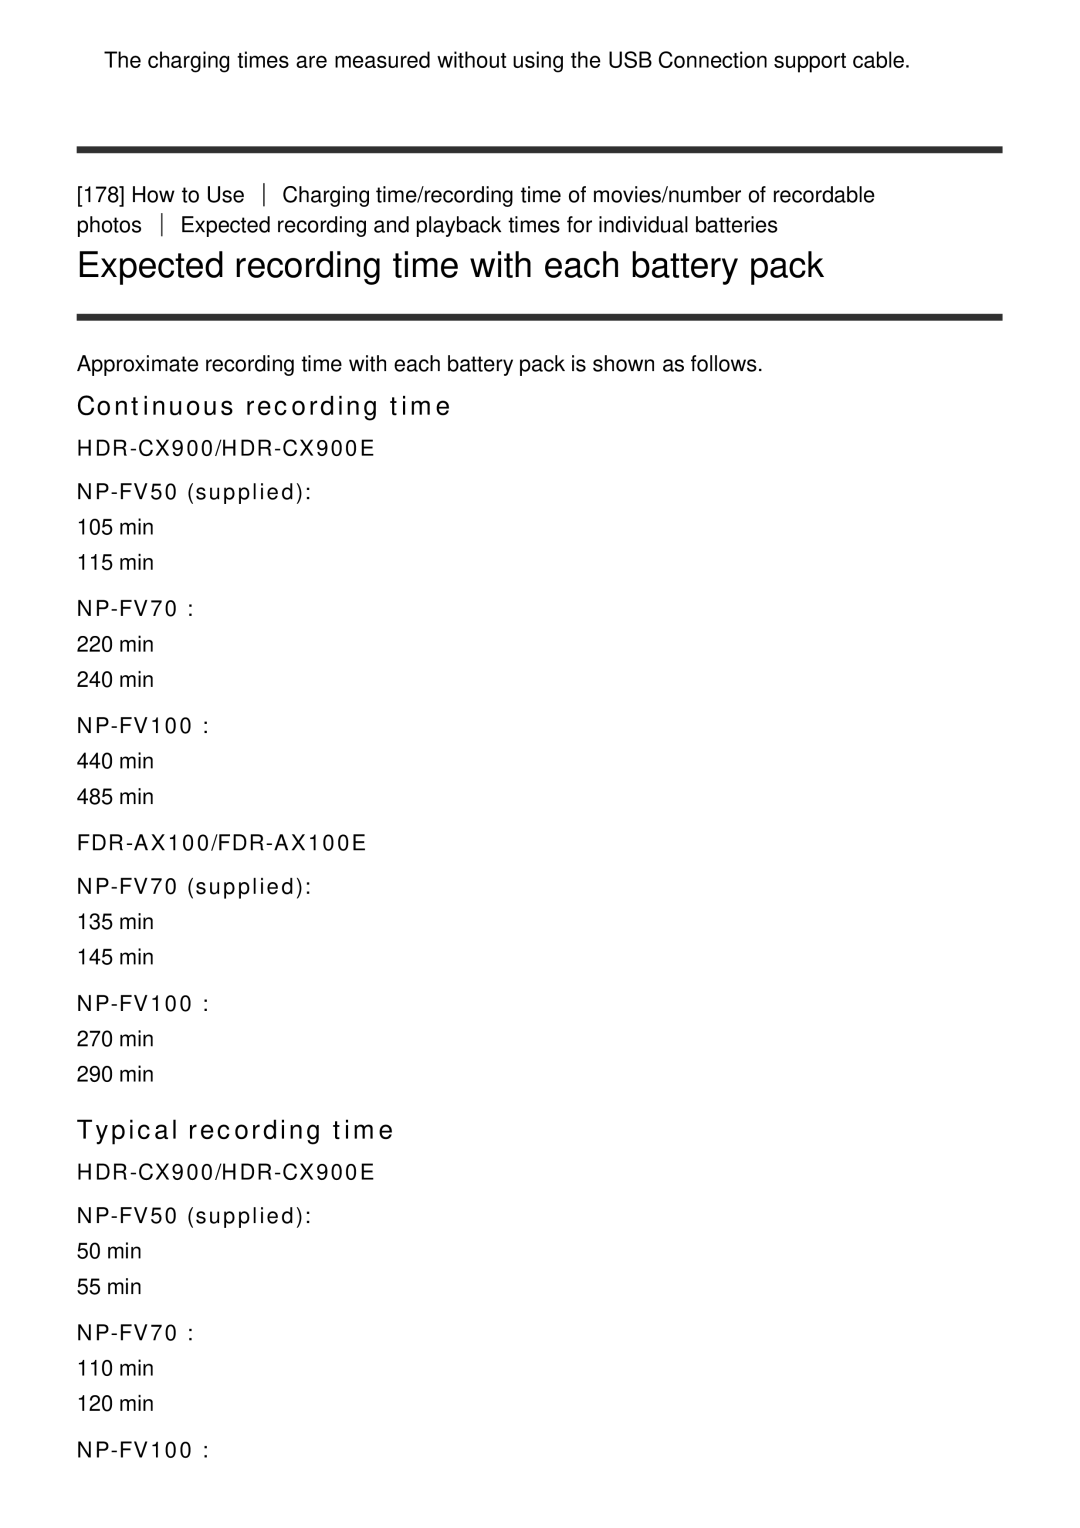 Sony HDR-CX900E Expected recording time with each battery pack, Continuous recording time, Typical recording time, NP-FV70 